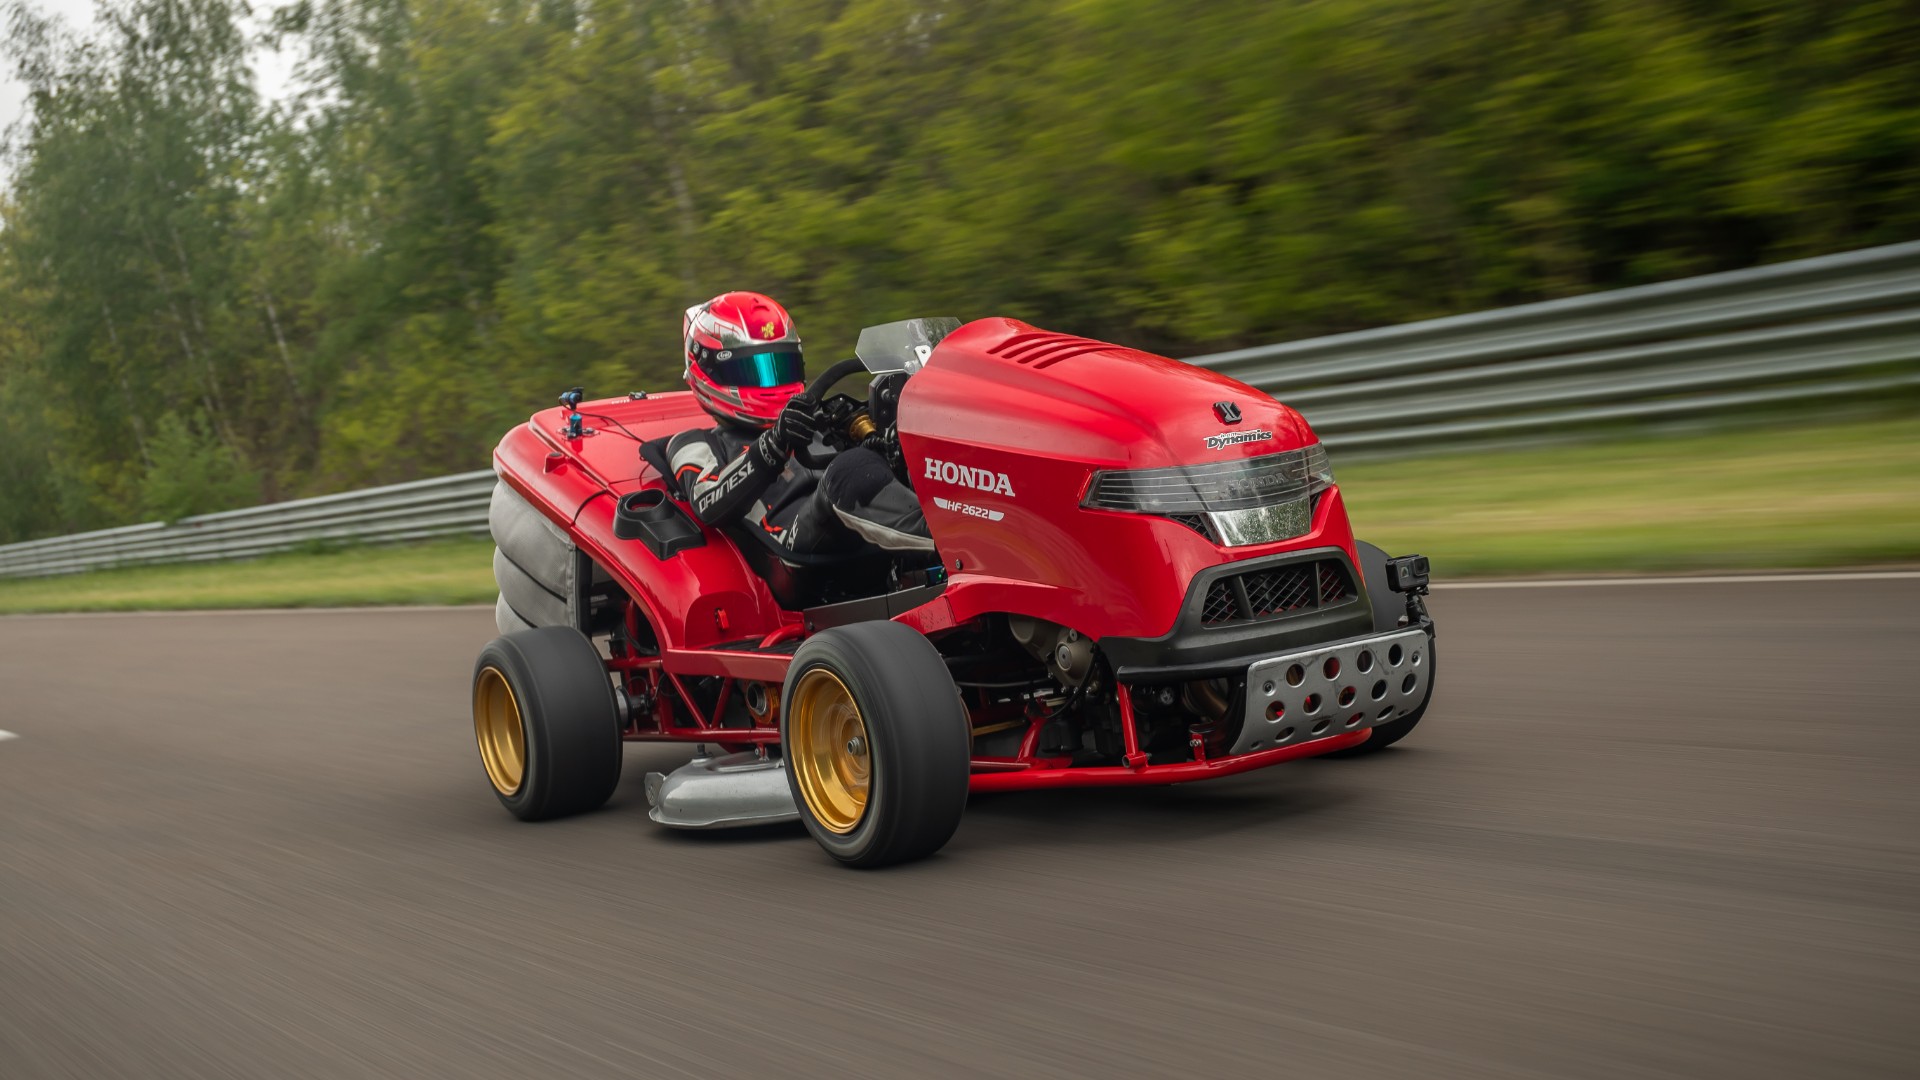 Honda's Mean Mower is the fastest lawnmower in the world